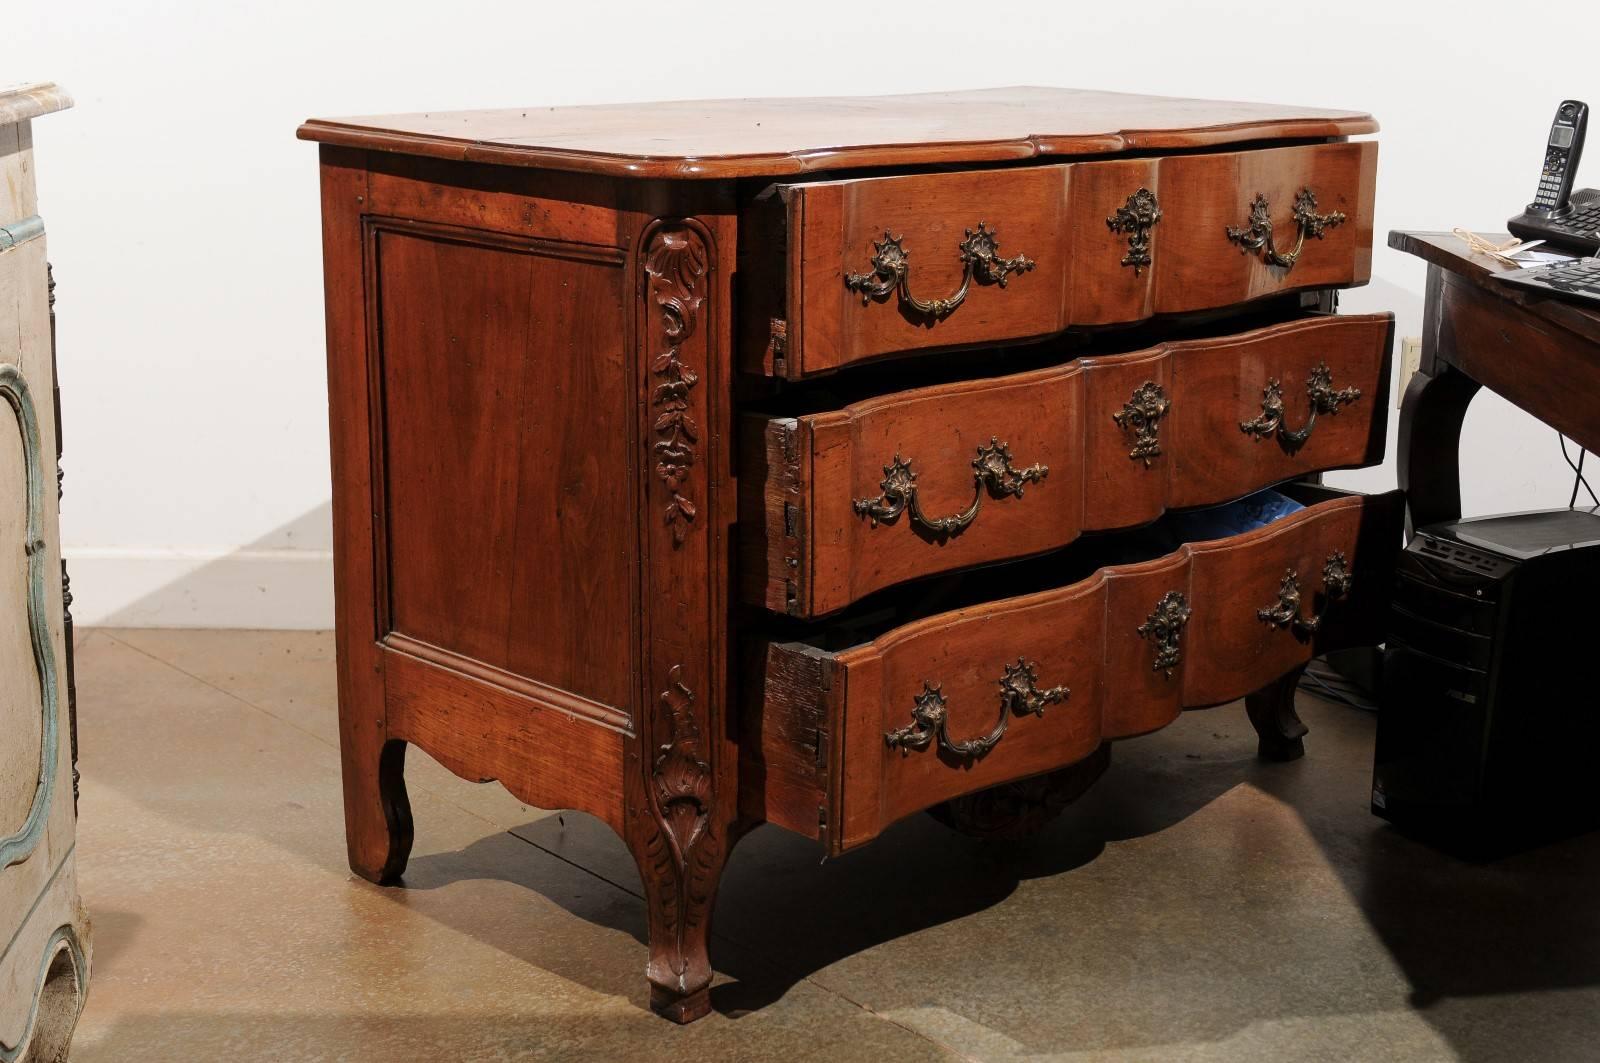 A French Regence walnut three-drawer commode en arbalete made in the manner of Thomas and Pierre Hache, ébénistes from Grenoble. This French Regence commode features a crossbow front, surmounted by a shaped two-plank top. The three hand-cut